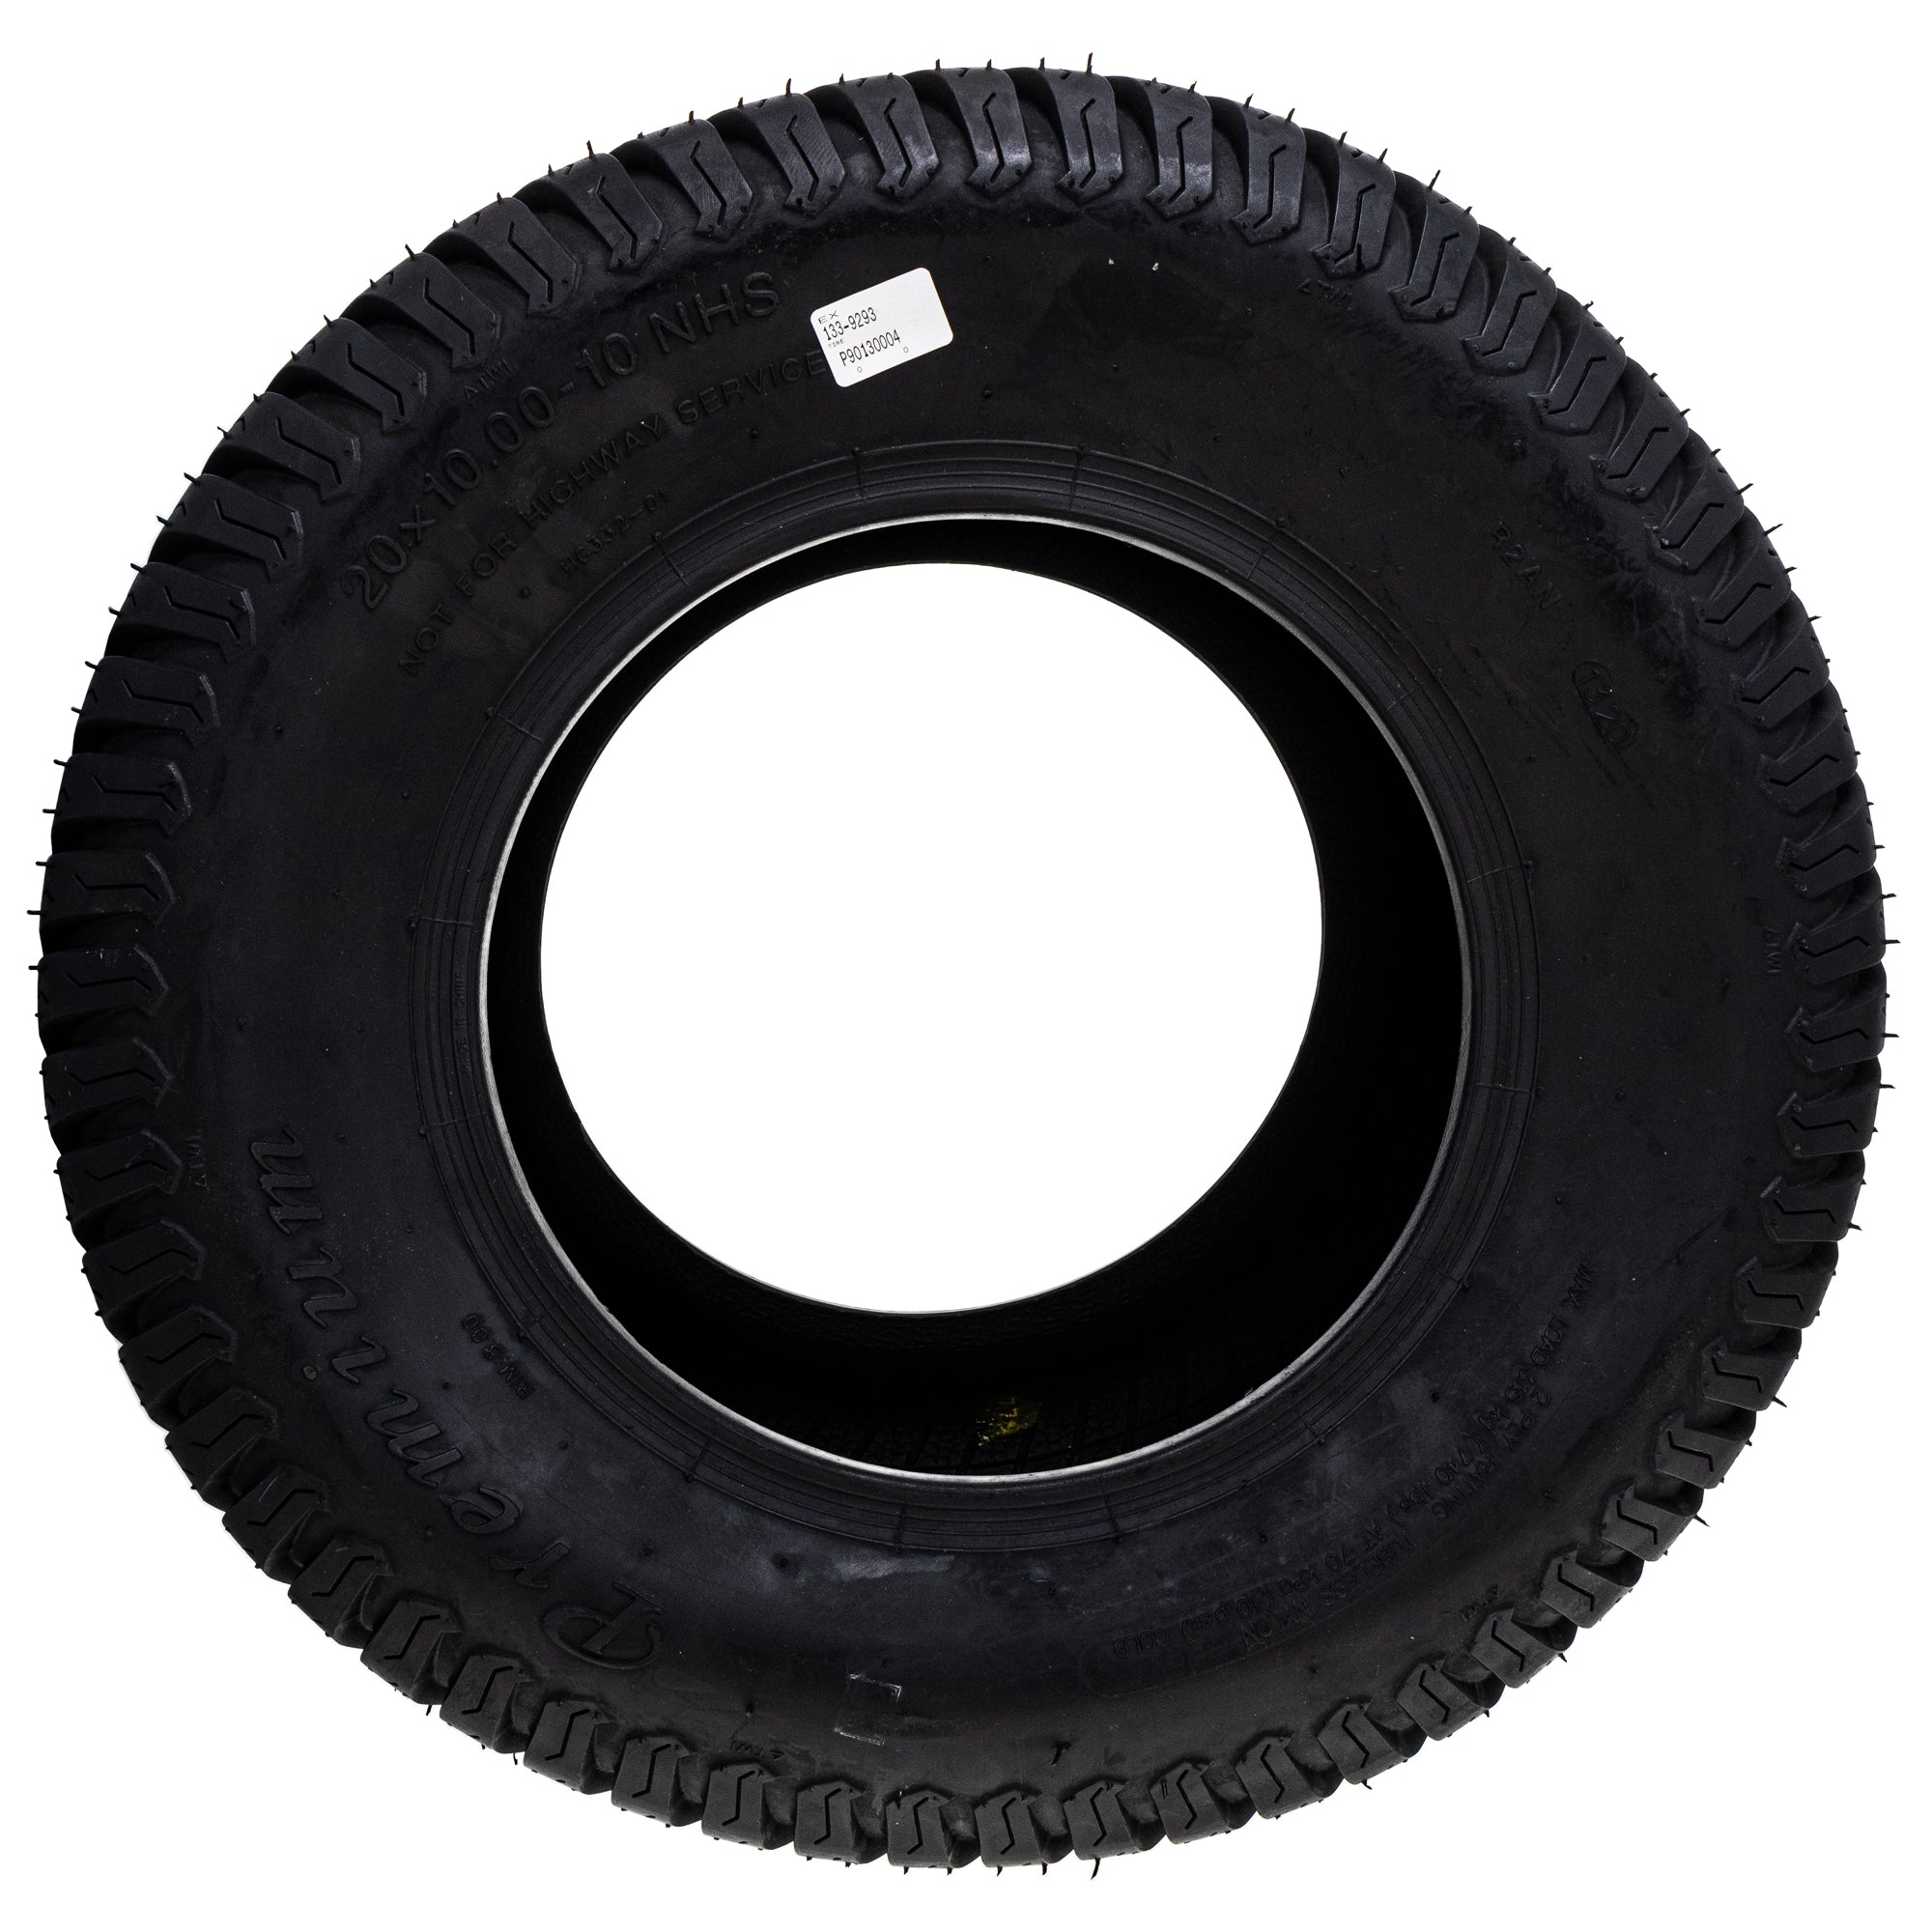 133-9293 Tire Quest S Series Zero Turn 50 60 Inch Models 2 Pack